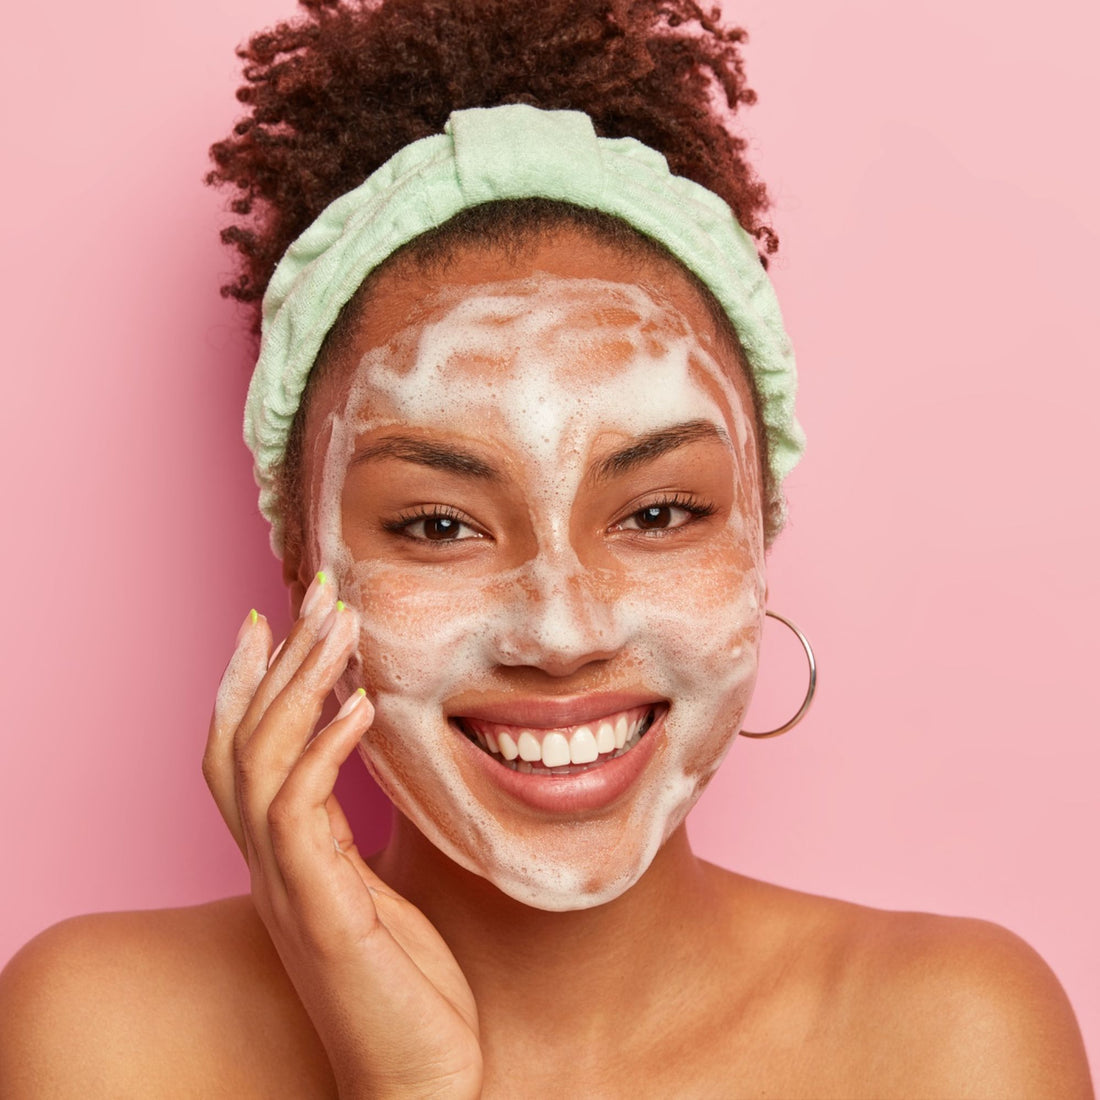 "The Ultimate Skincare Guide: 7 Steps to Glowing, Hydrated Skin"